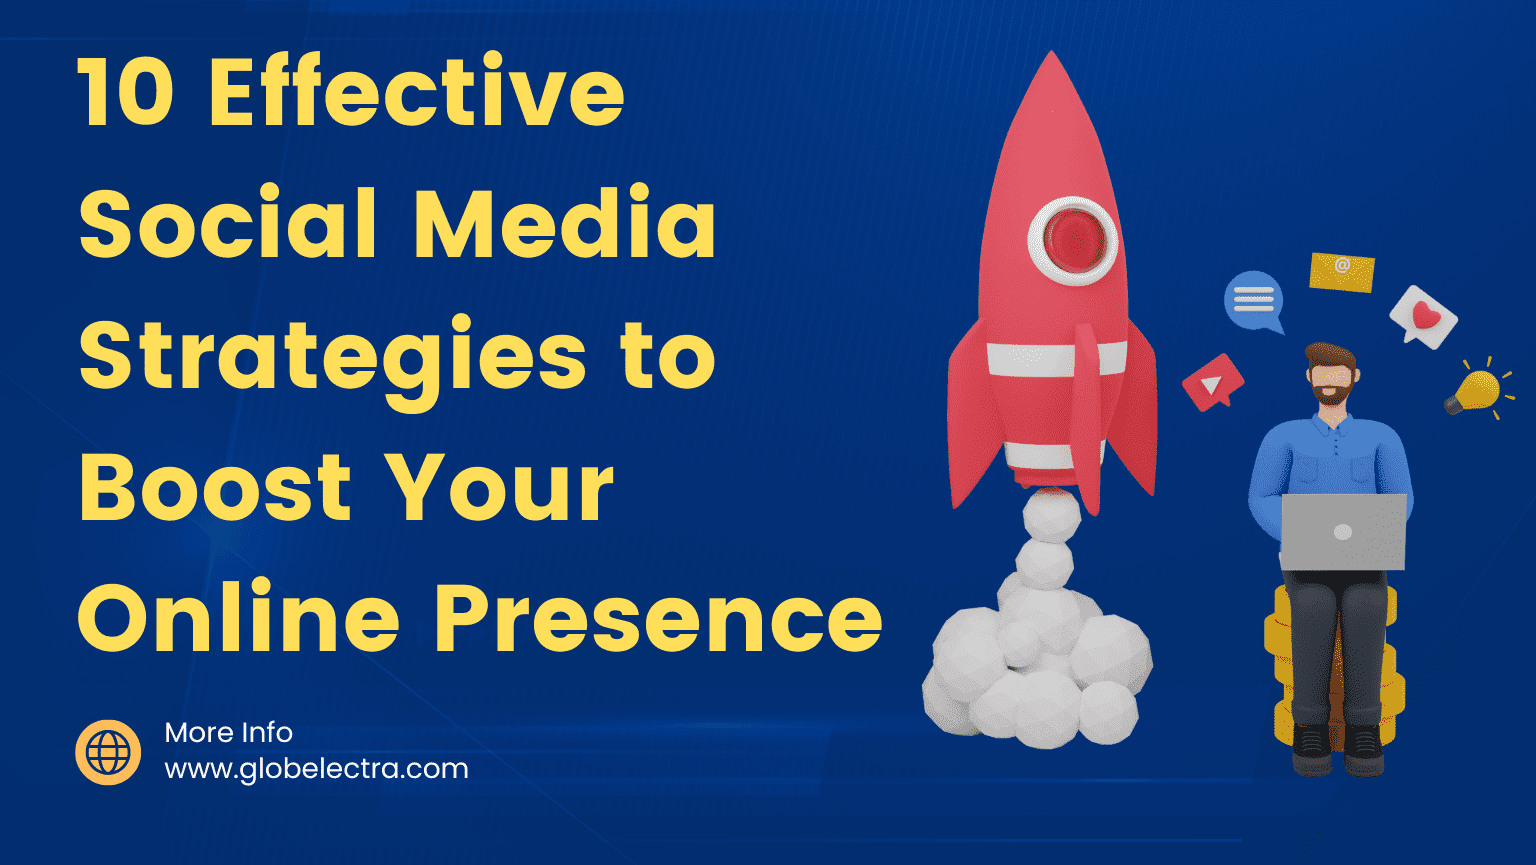 10 Effective Social Media Strategies to Boost Your Online Presence